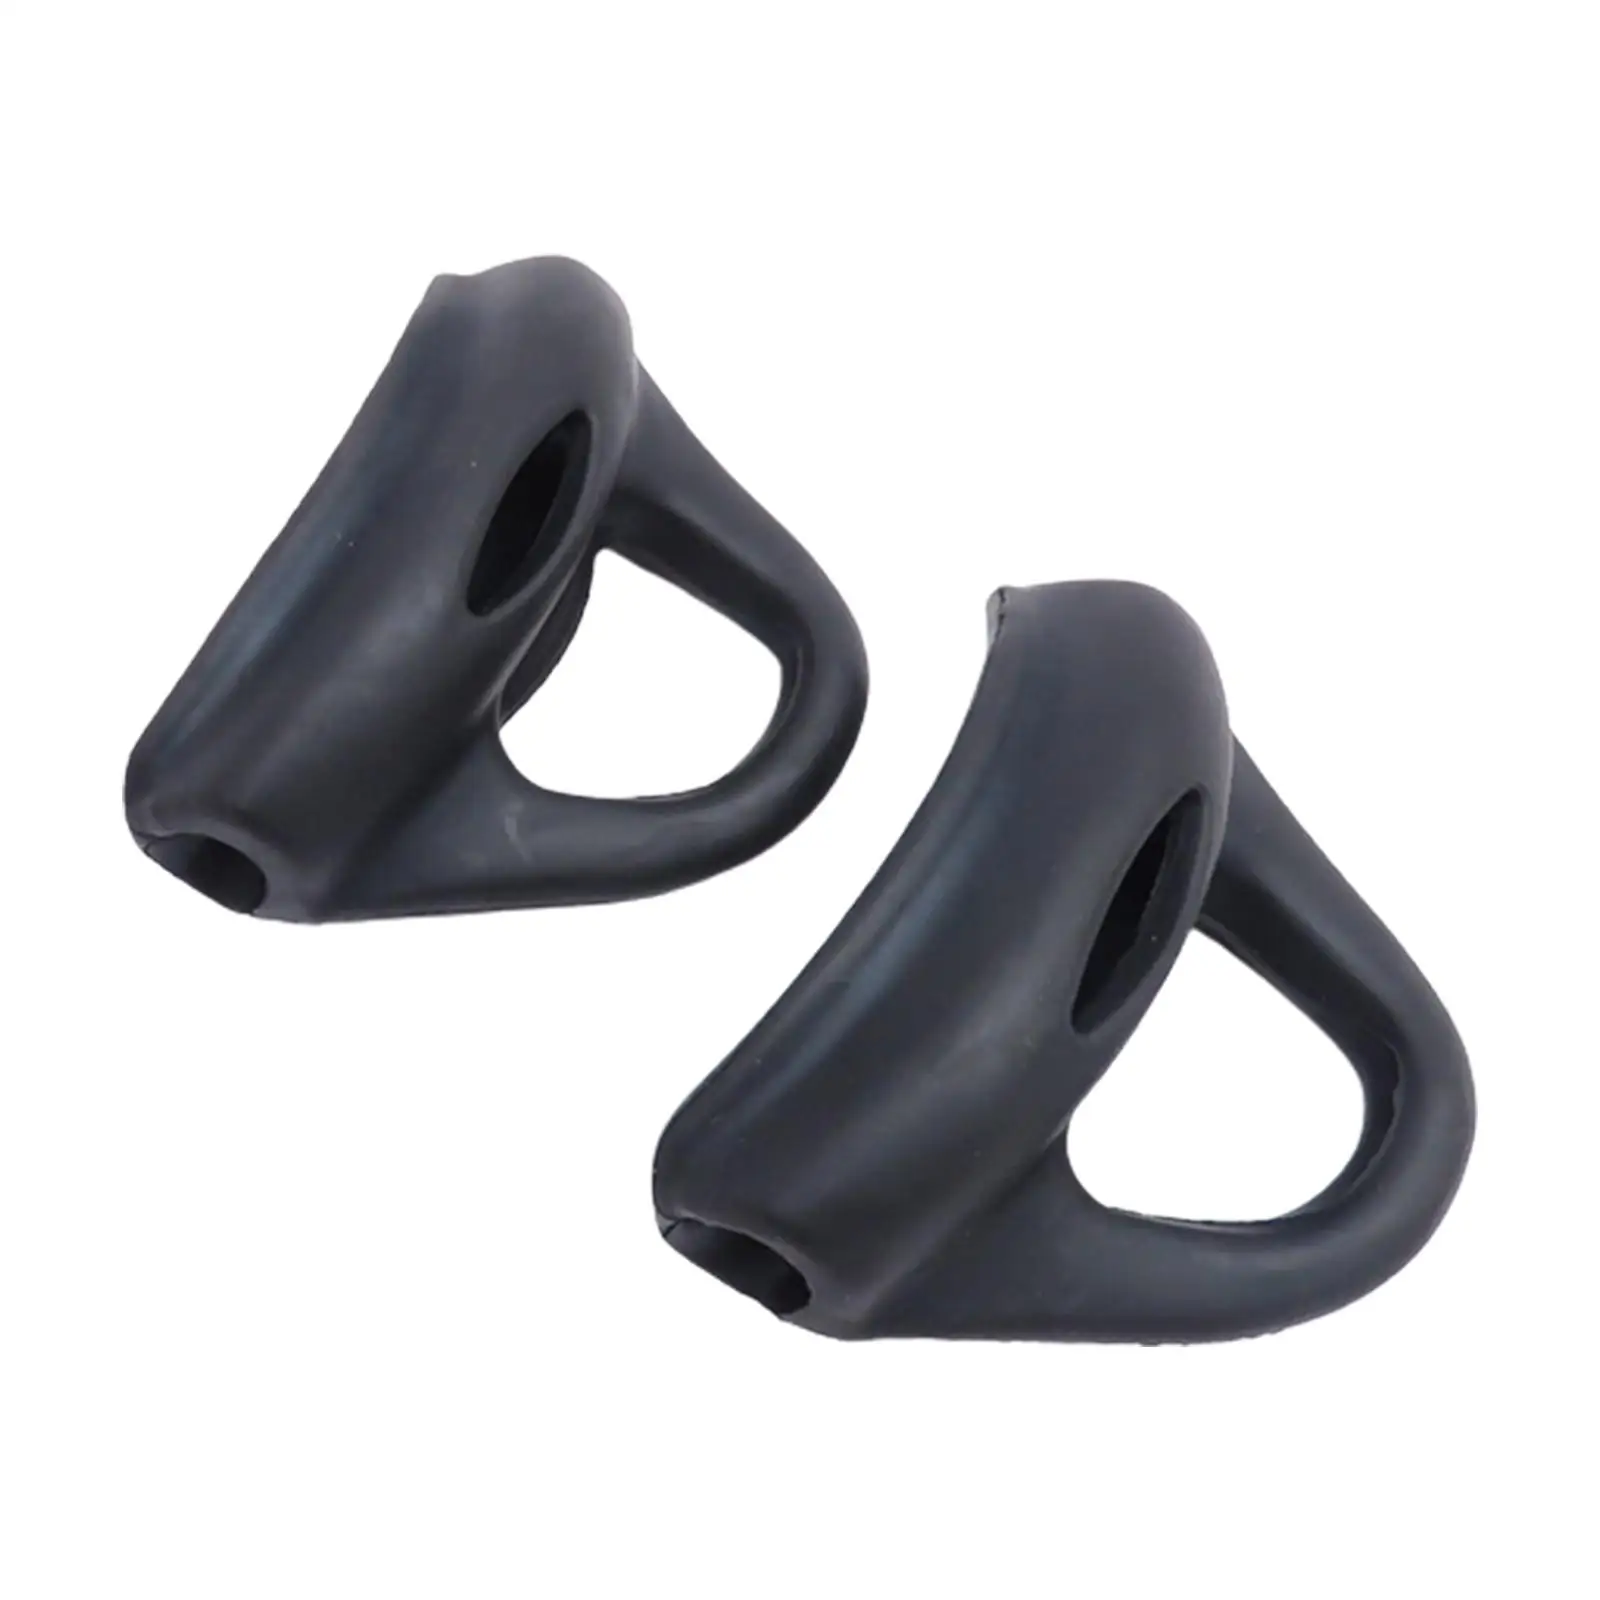 Comfortable Scuba Diving Spring Strap Heel Nonslip Replace Footwear Parts Buckles  Heel for Swimming, Canoeing, Water Sports